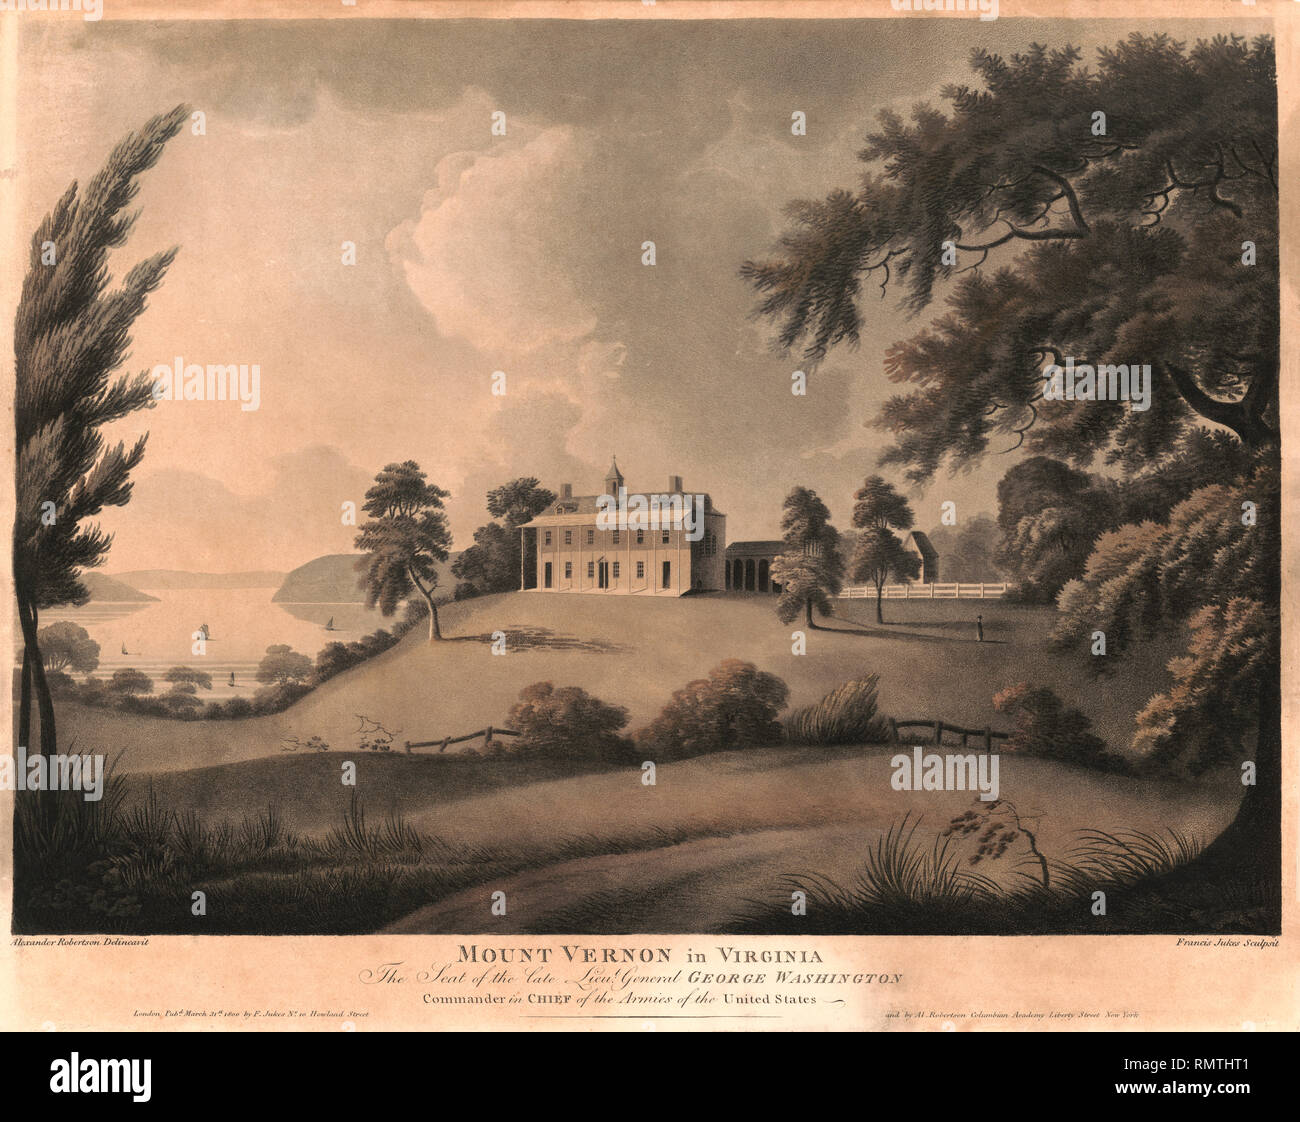 Mount Vernon in Virginia, the Seat of the Late Lieut. General George Washington, Commander in Chief of the Armies of the United States, by Alexander Robertson Delineavit with Engraving by Francis Jukes Sculpsit, 1800 Stock Photo